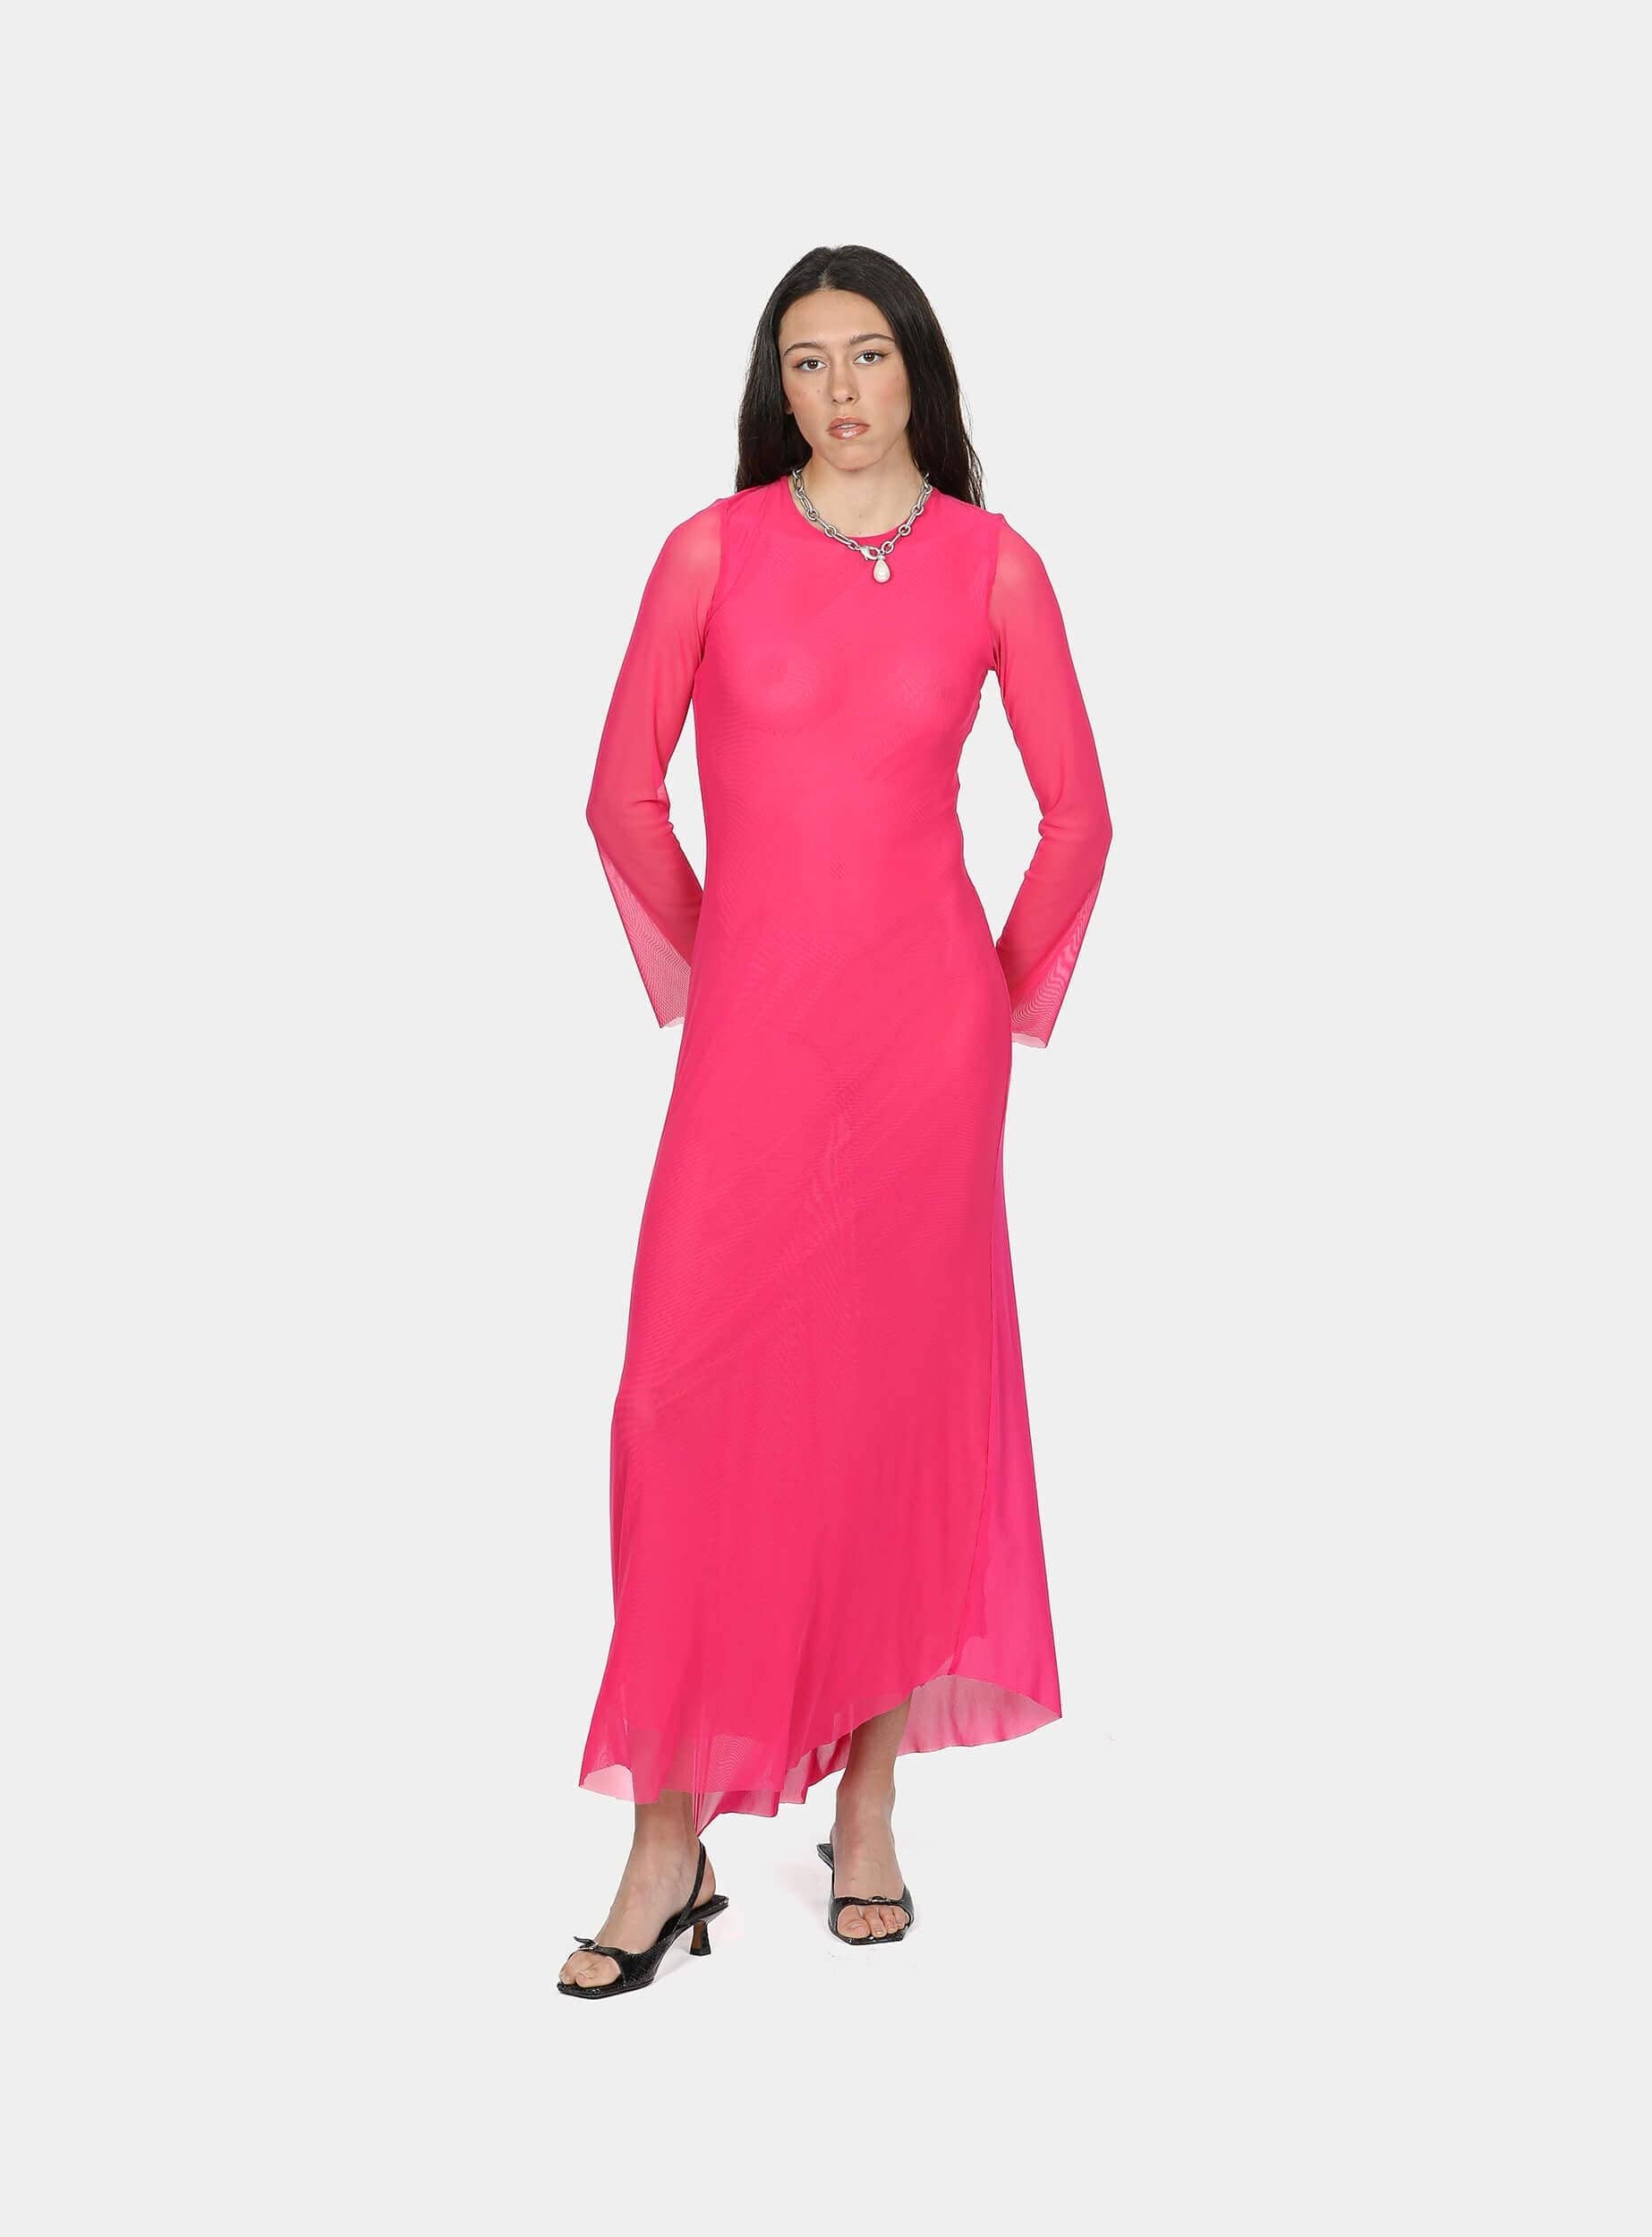 LAAGAM - CLAIRE PINK DRESS